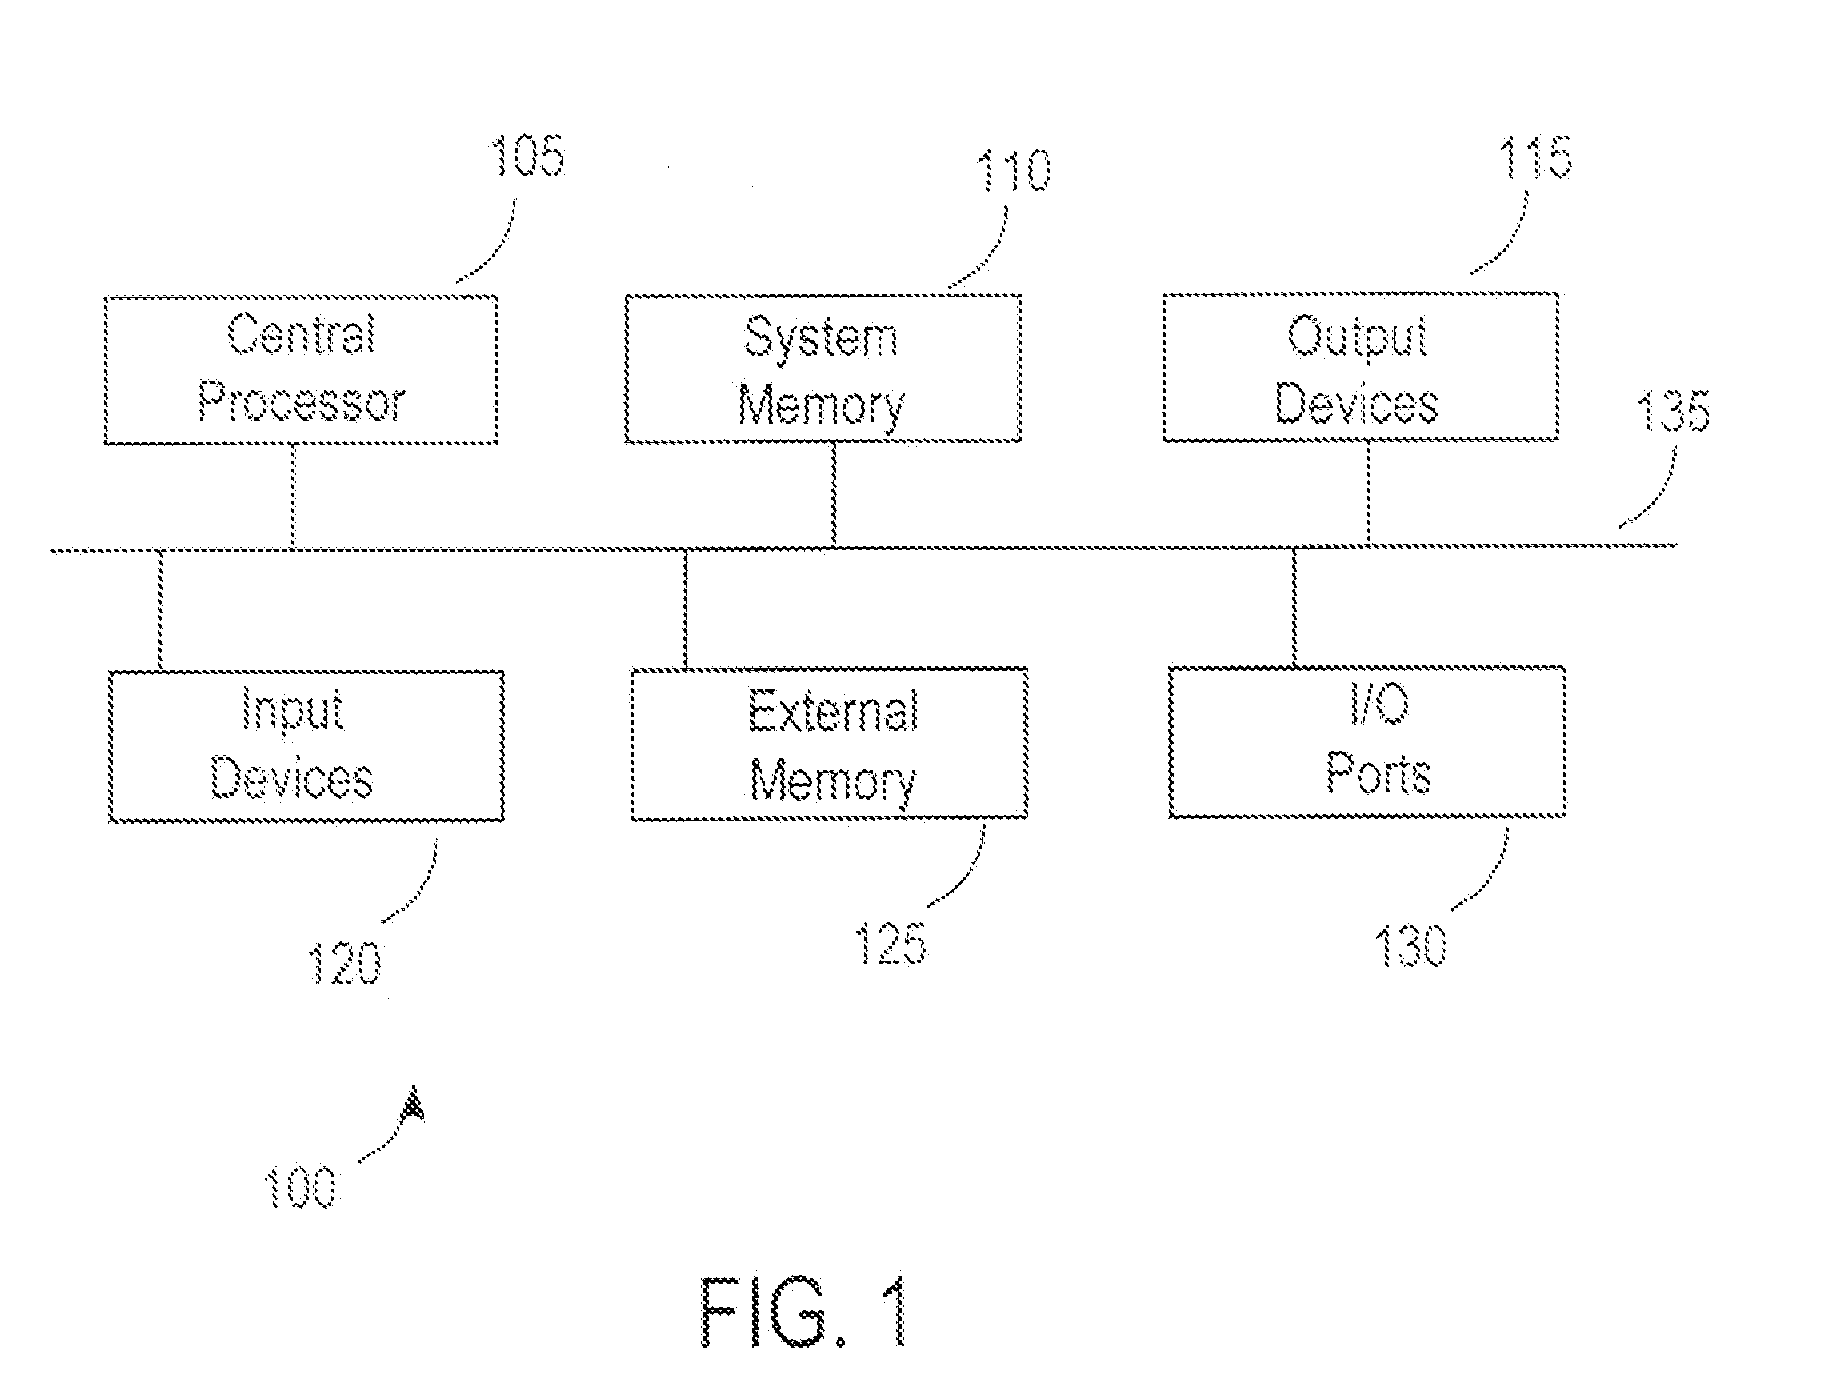 Method and system for three-dimensional feature attribution through synergy of rational polynomial coefficients and projective geometry